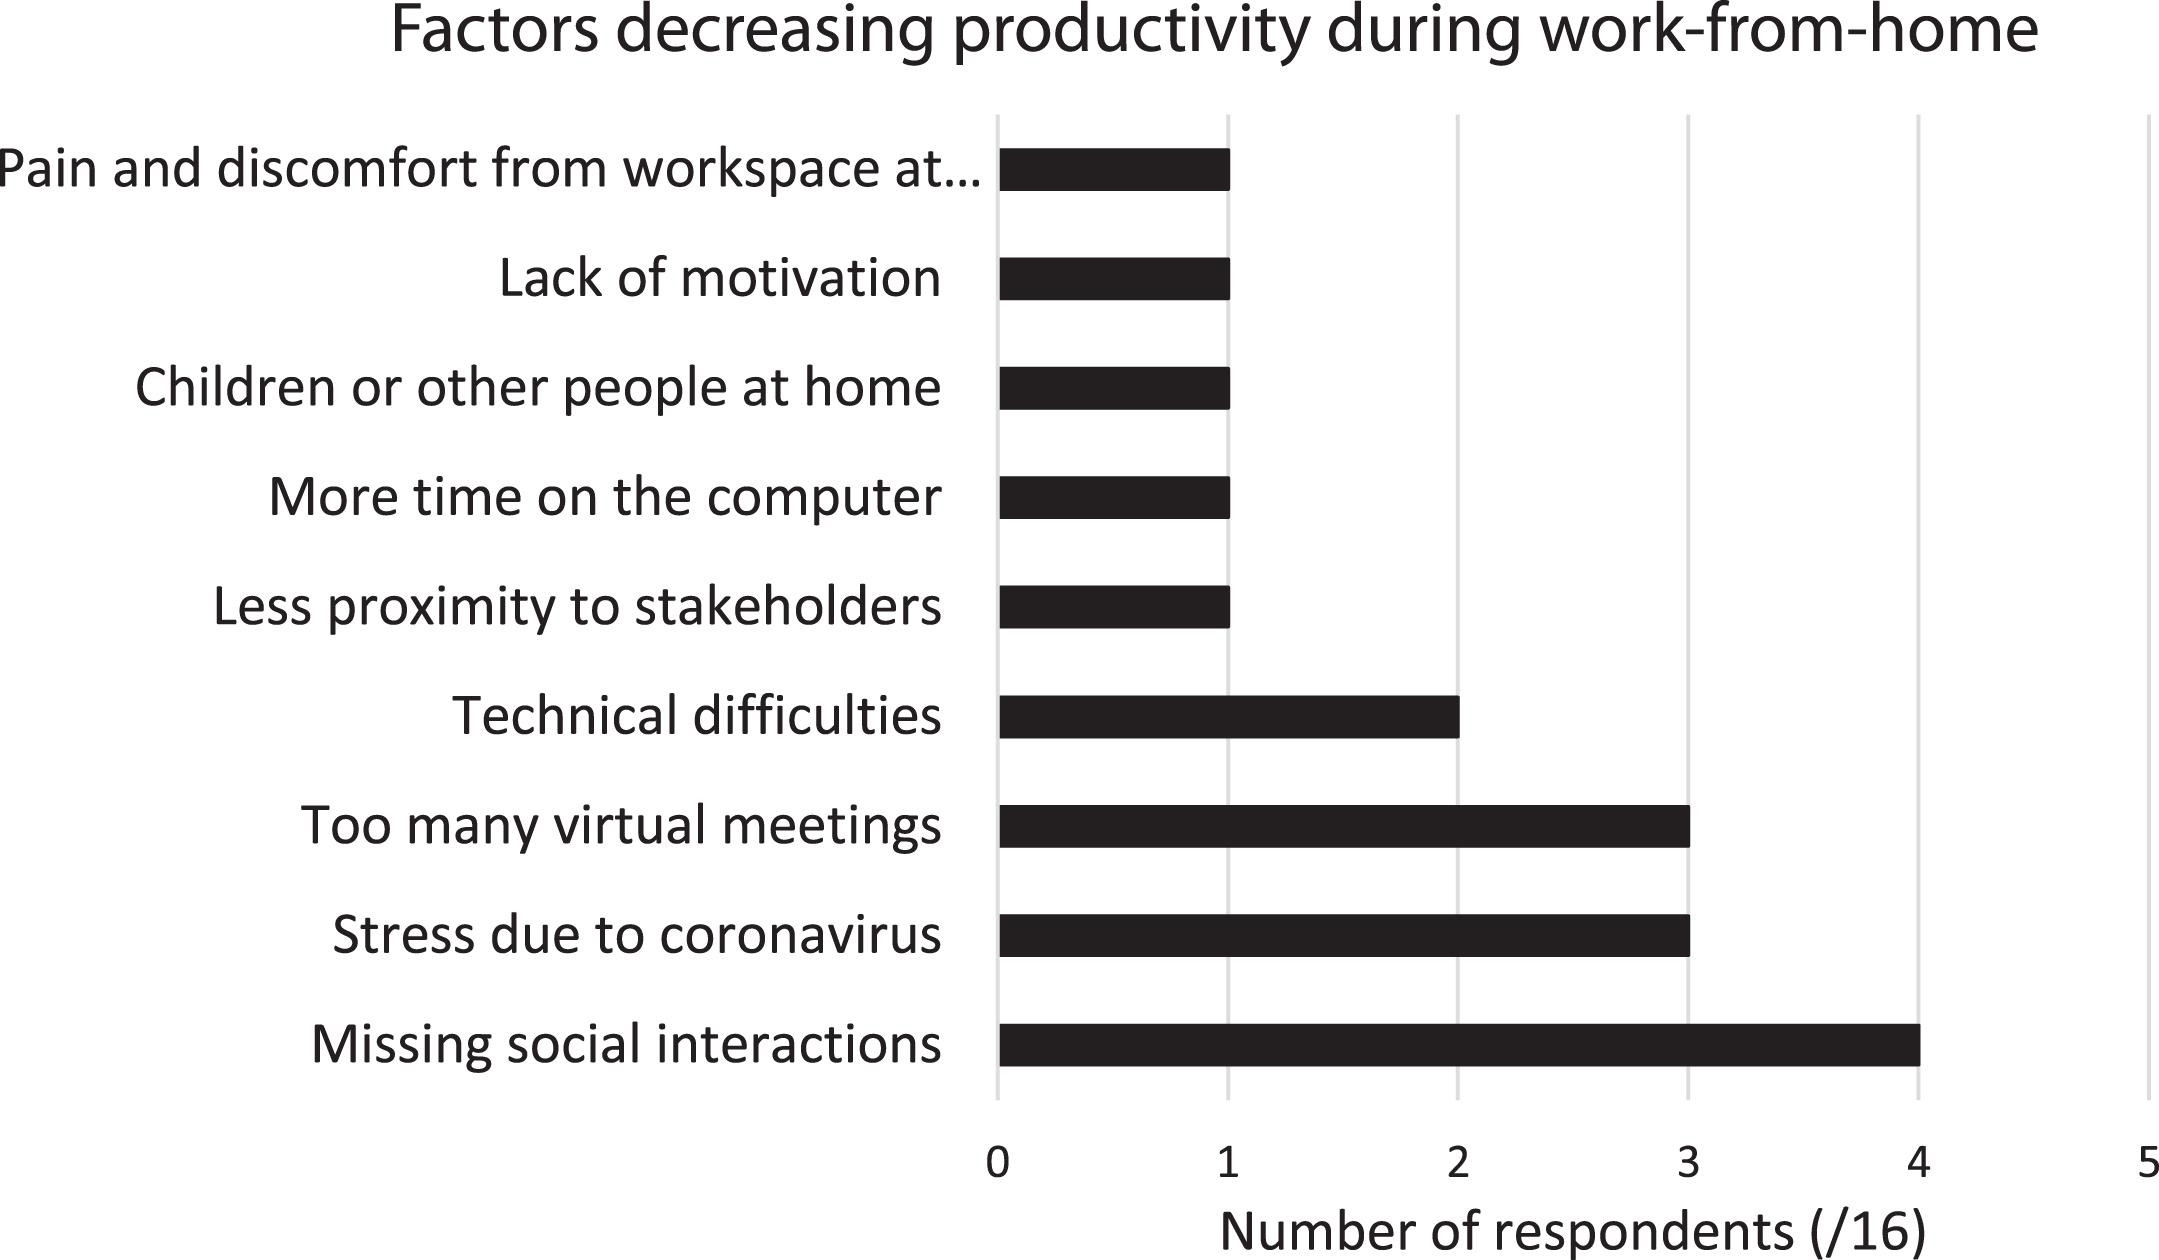 Responses to "What is causing you to be less productive working from home?" More than one response was possible.